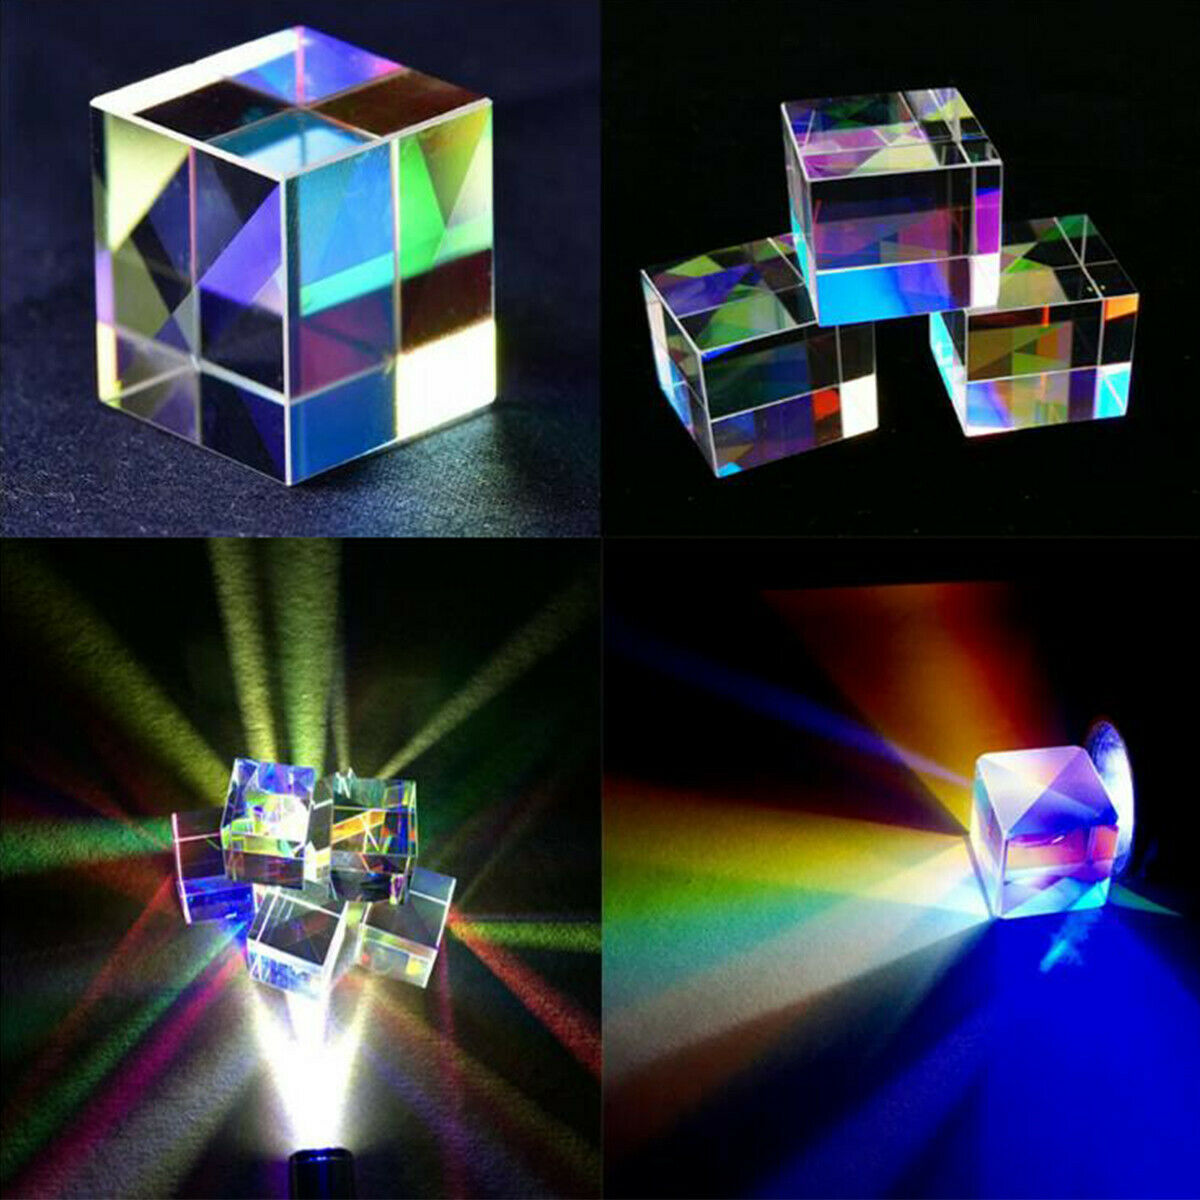 18X18X18 MM Optical Glass X-cube Dichroic Cube Prism RGB Combiner Splitter Gift